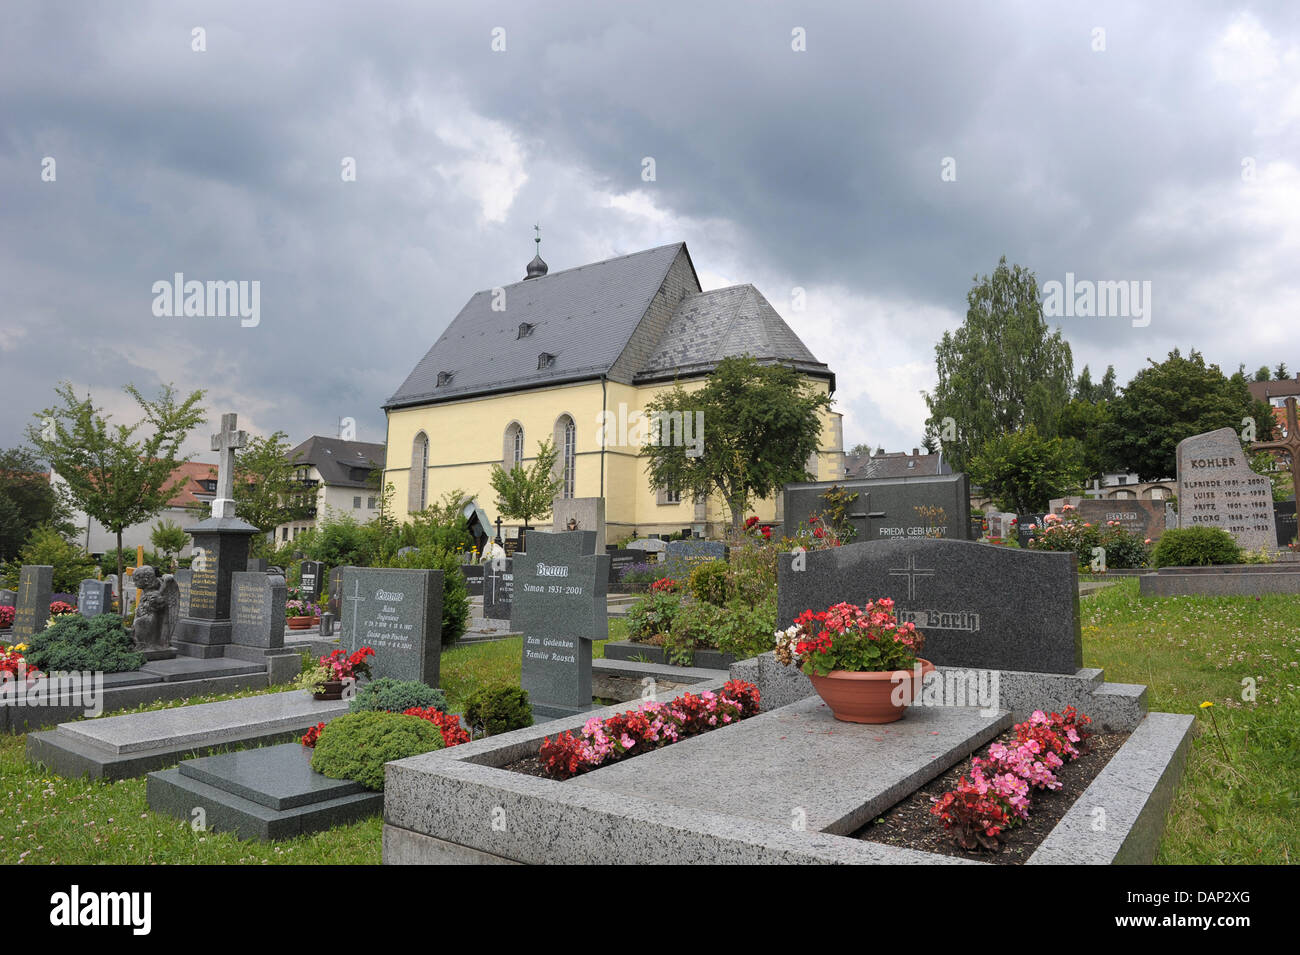 The cemetery and church in Wunsiedel, where the grave of Adolf Hitler's Deputy Rudolf Hess (1894-1987) was previously situated, is pictured on 21 July 2011, Germany. For more than two decades, the grave was a place of pilgrimmage for neo-nazis and right-wing extremists. The remains of Rudolf Hesse have been exhumed and his grave destroyed. Hess's remains are to be cremated and the  Stock Photo